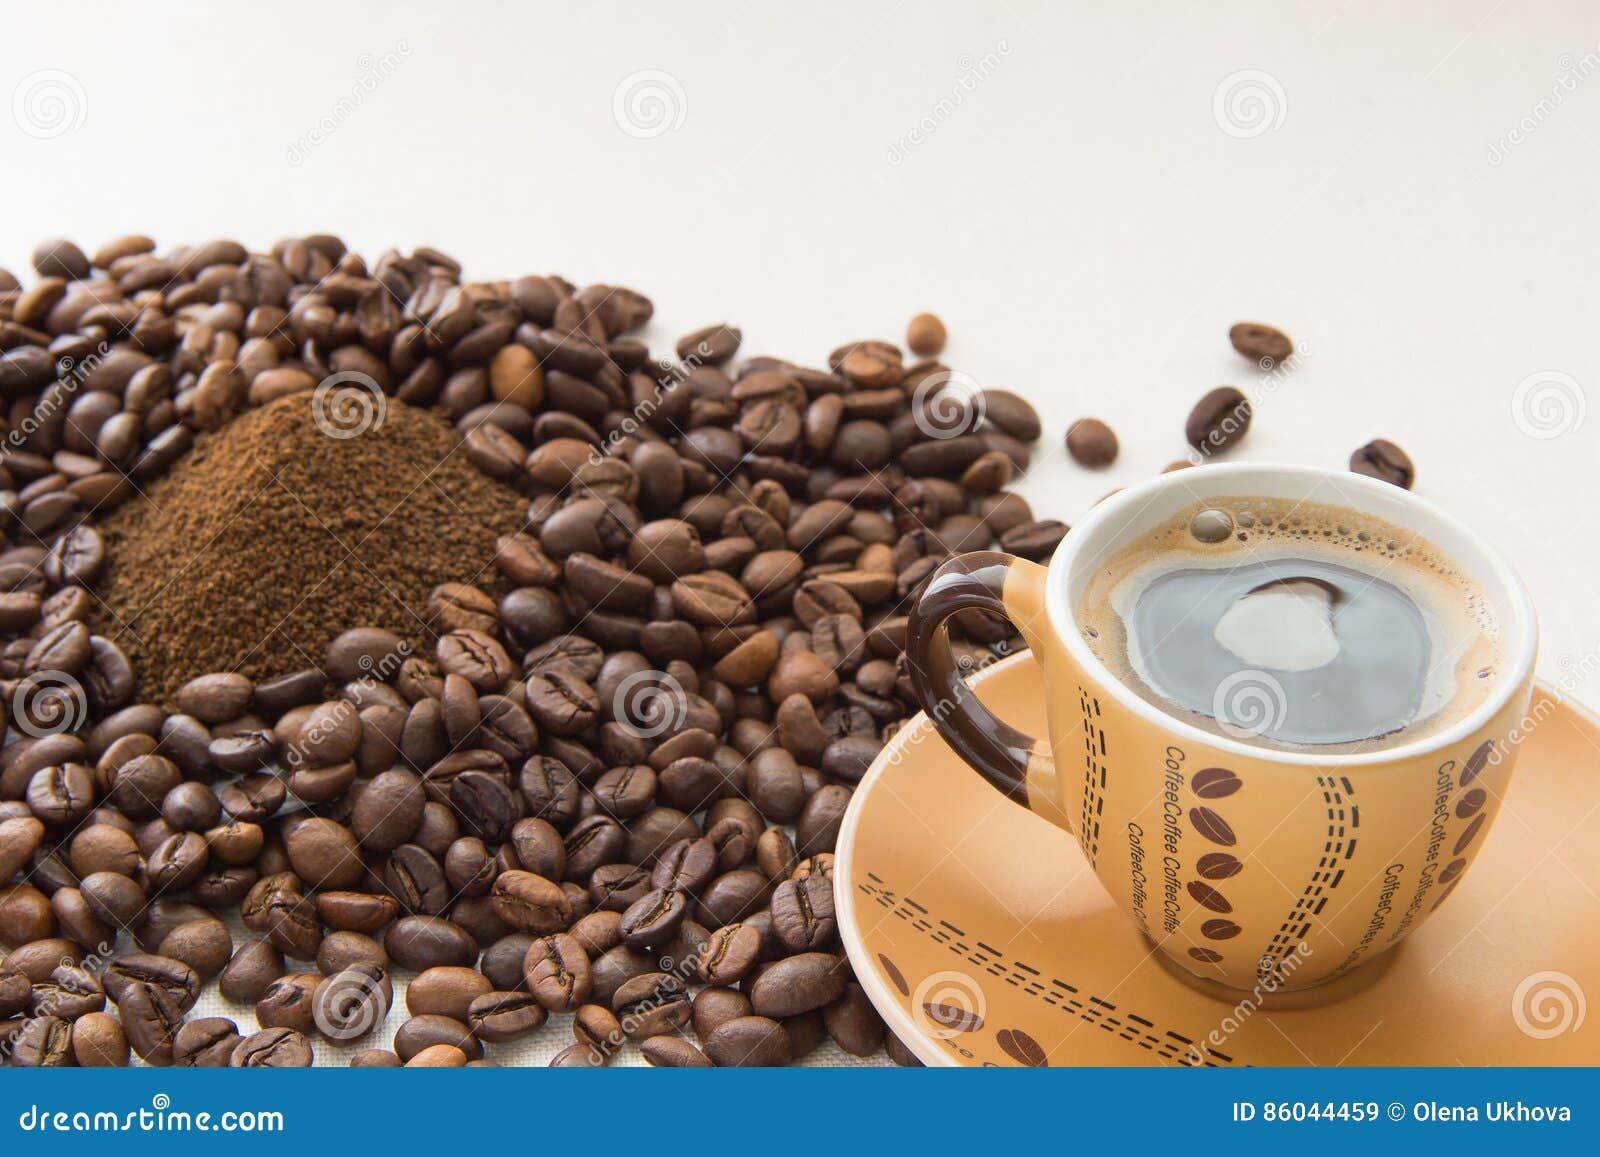 a cup of coffee, coffee beans, ground coffee